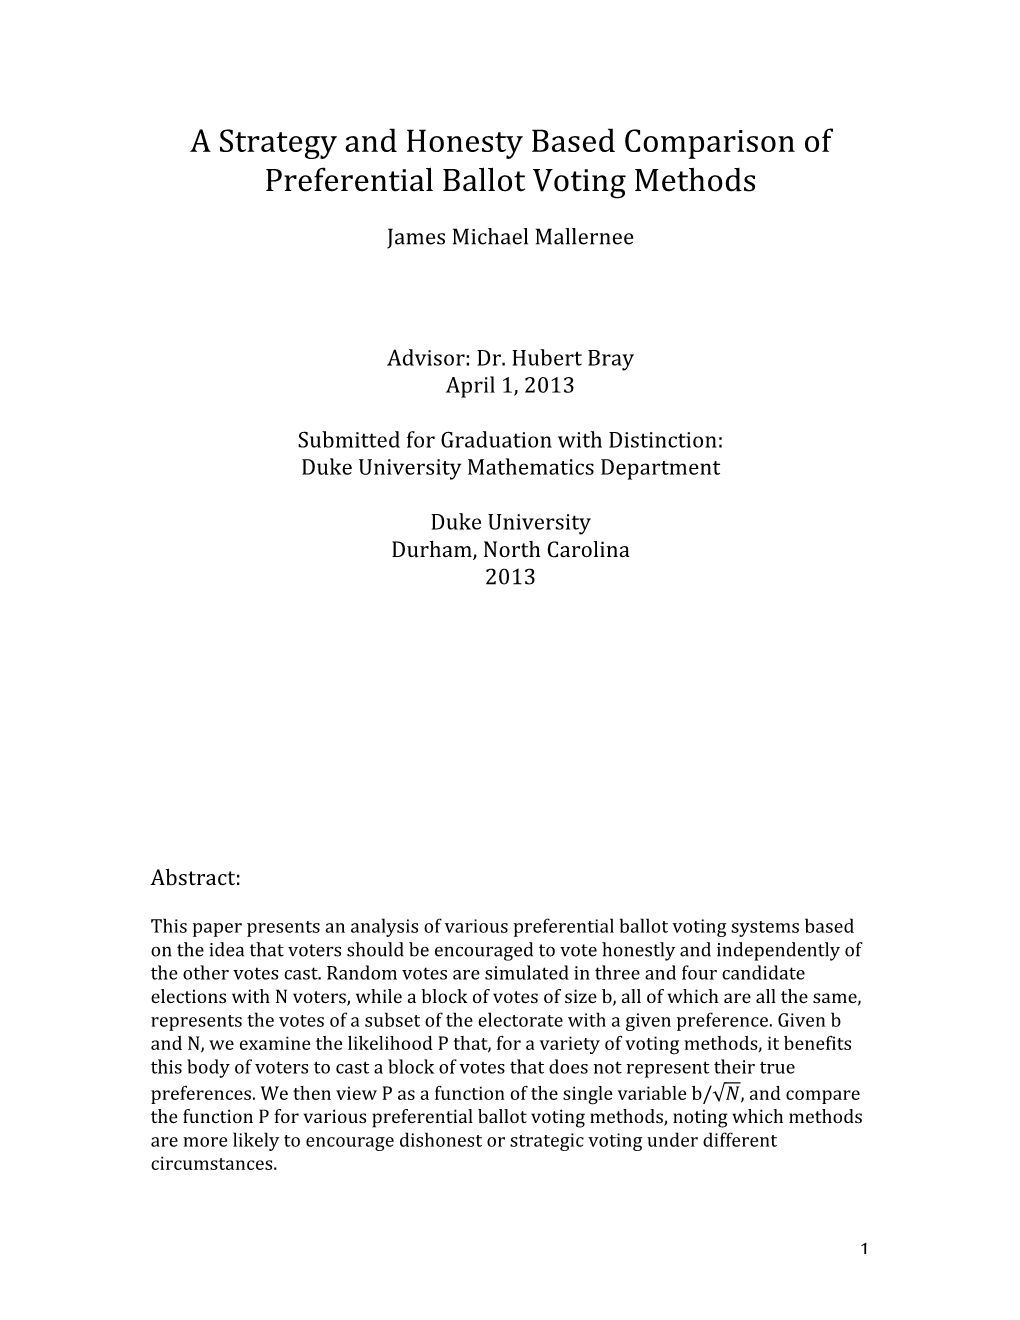 A Strategy and Honesty Based Comparison of Preferential Ballot Voting Methods